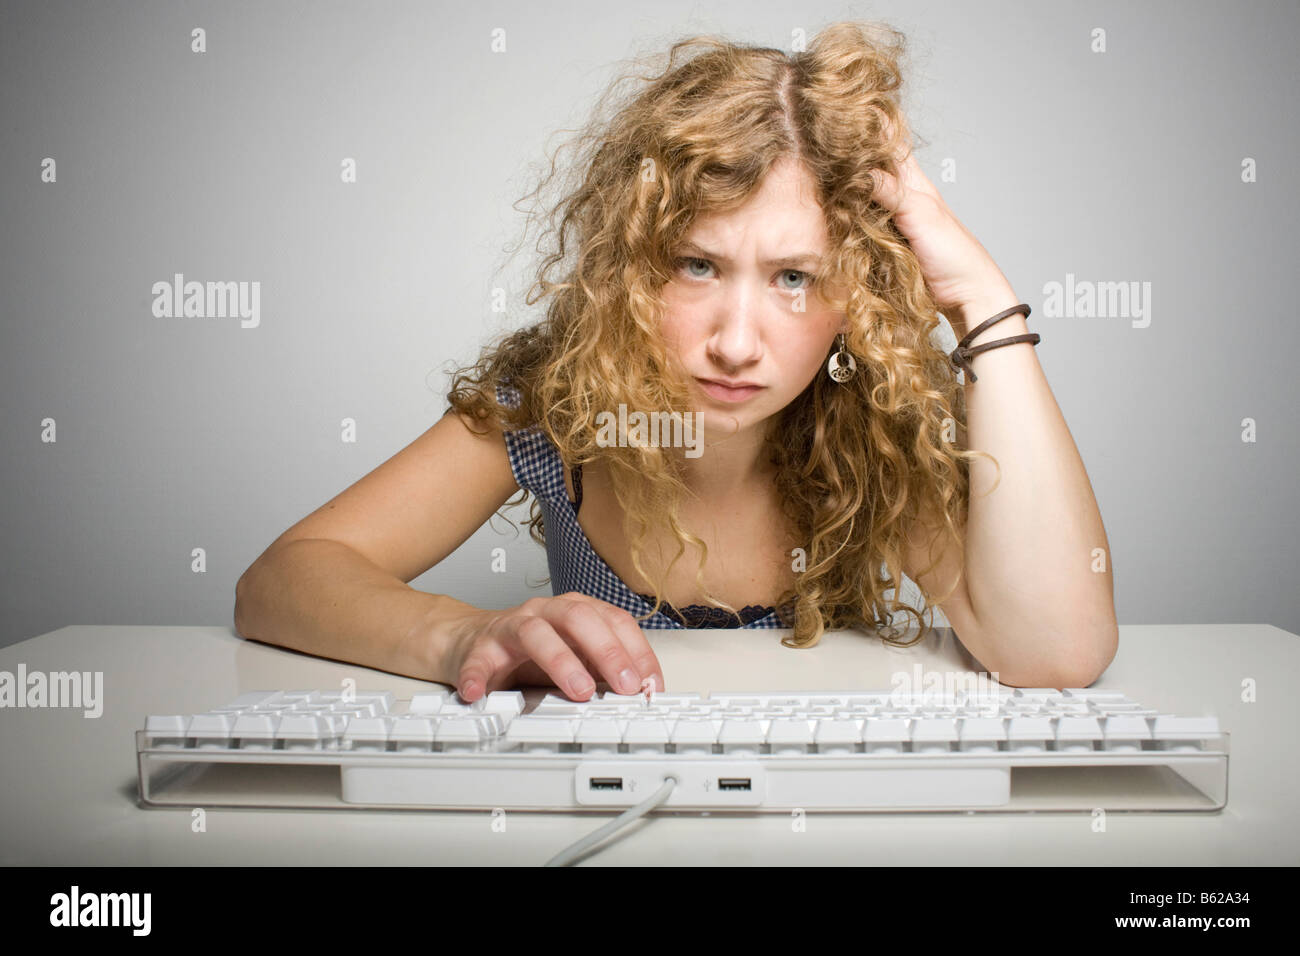 Young woman with long hair sitting frustrated behind a computer keyboard on a table Stock Photo